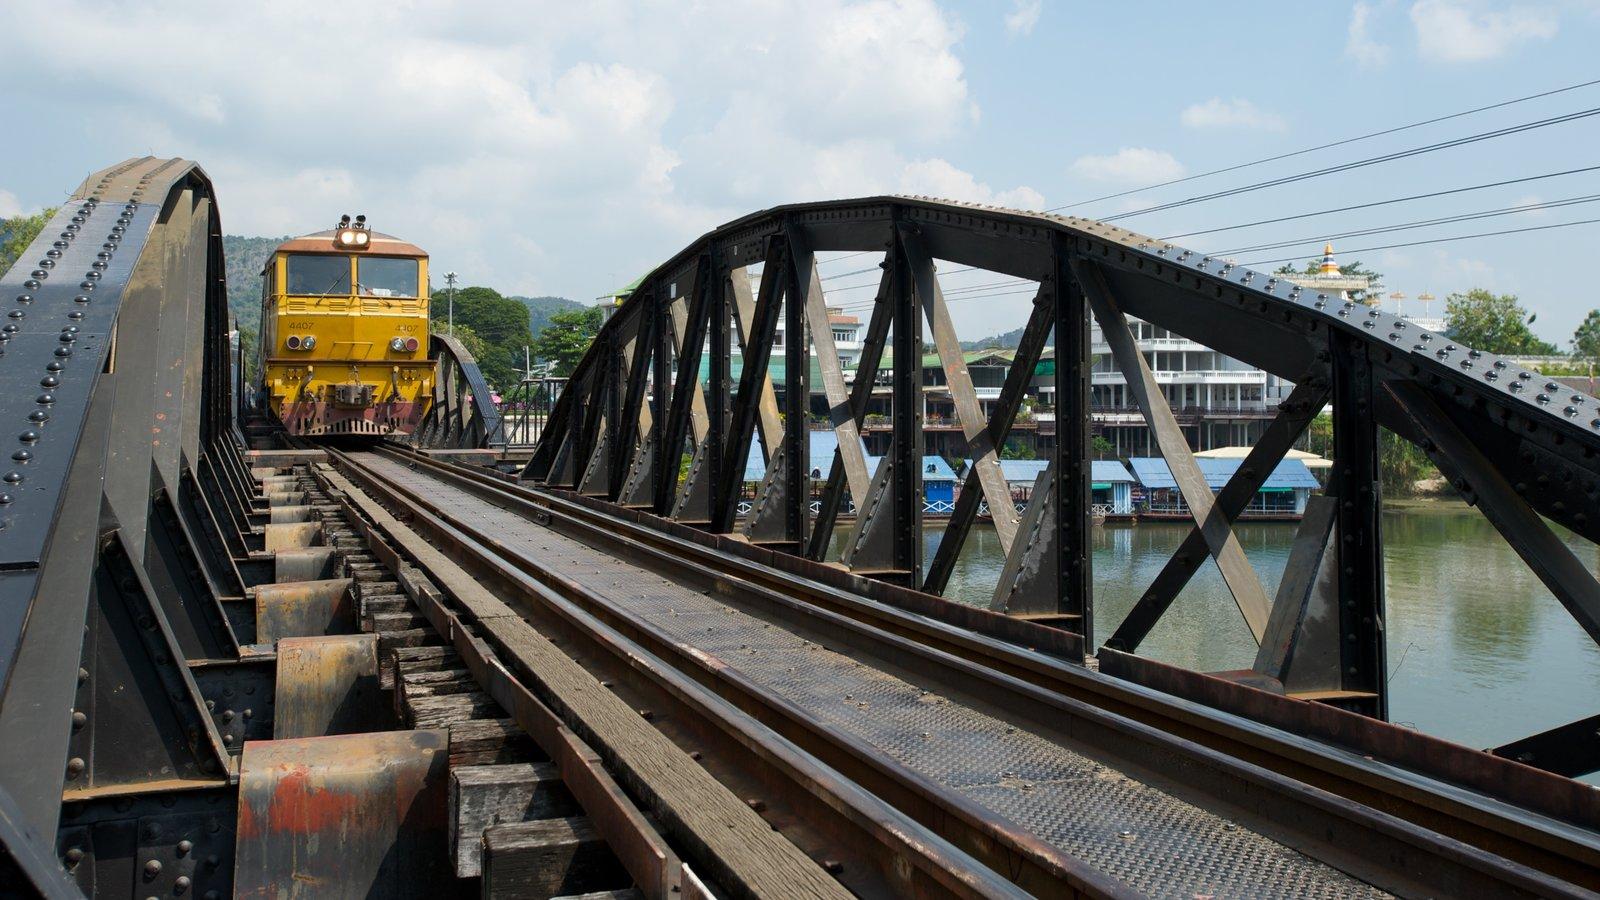 Bridge Over the River Kwai picture: View photo and image